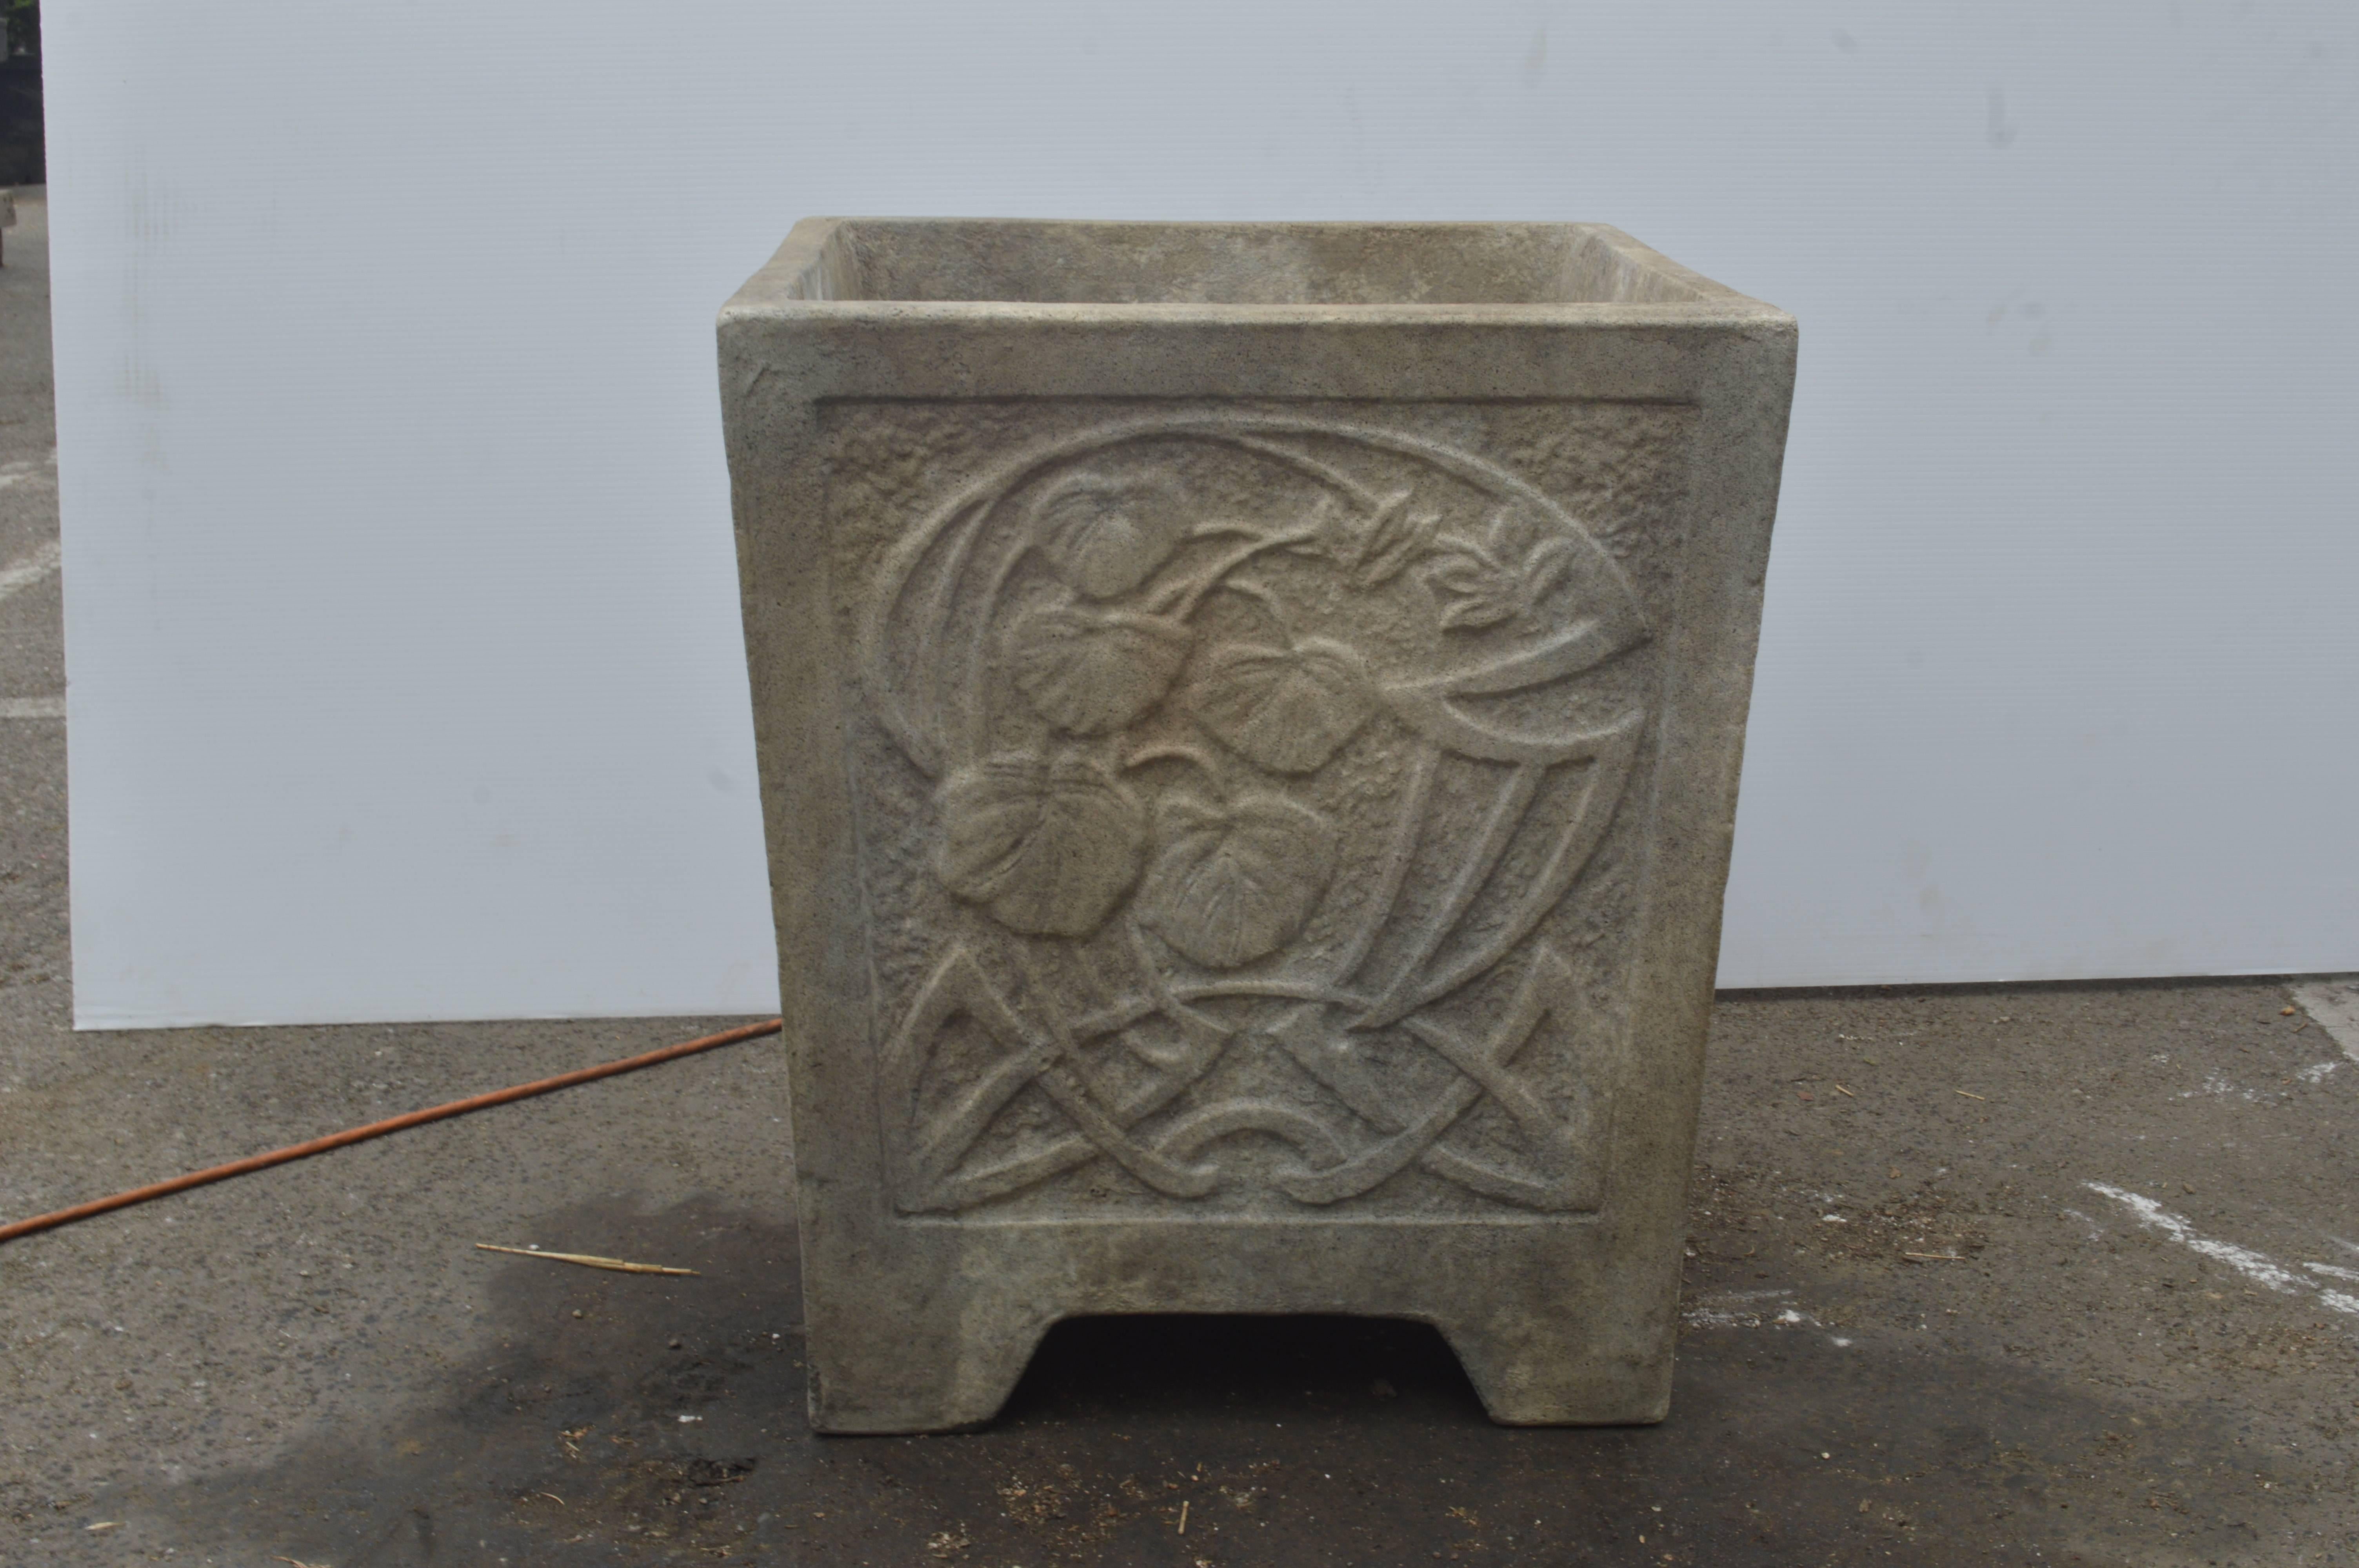 Beautifully designed concrete square planter available in one size.
7-8 week lead time for production if not in stock.